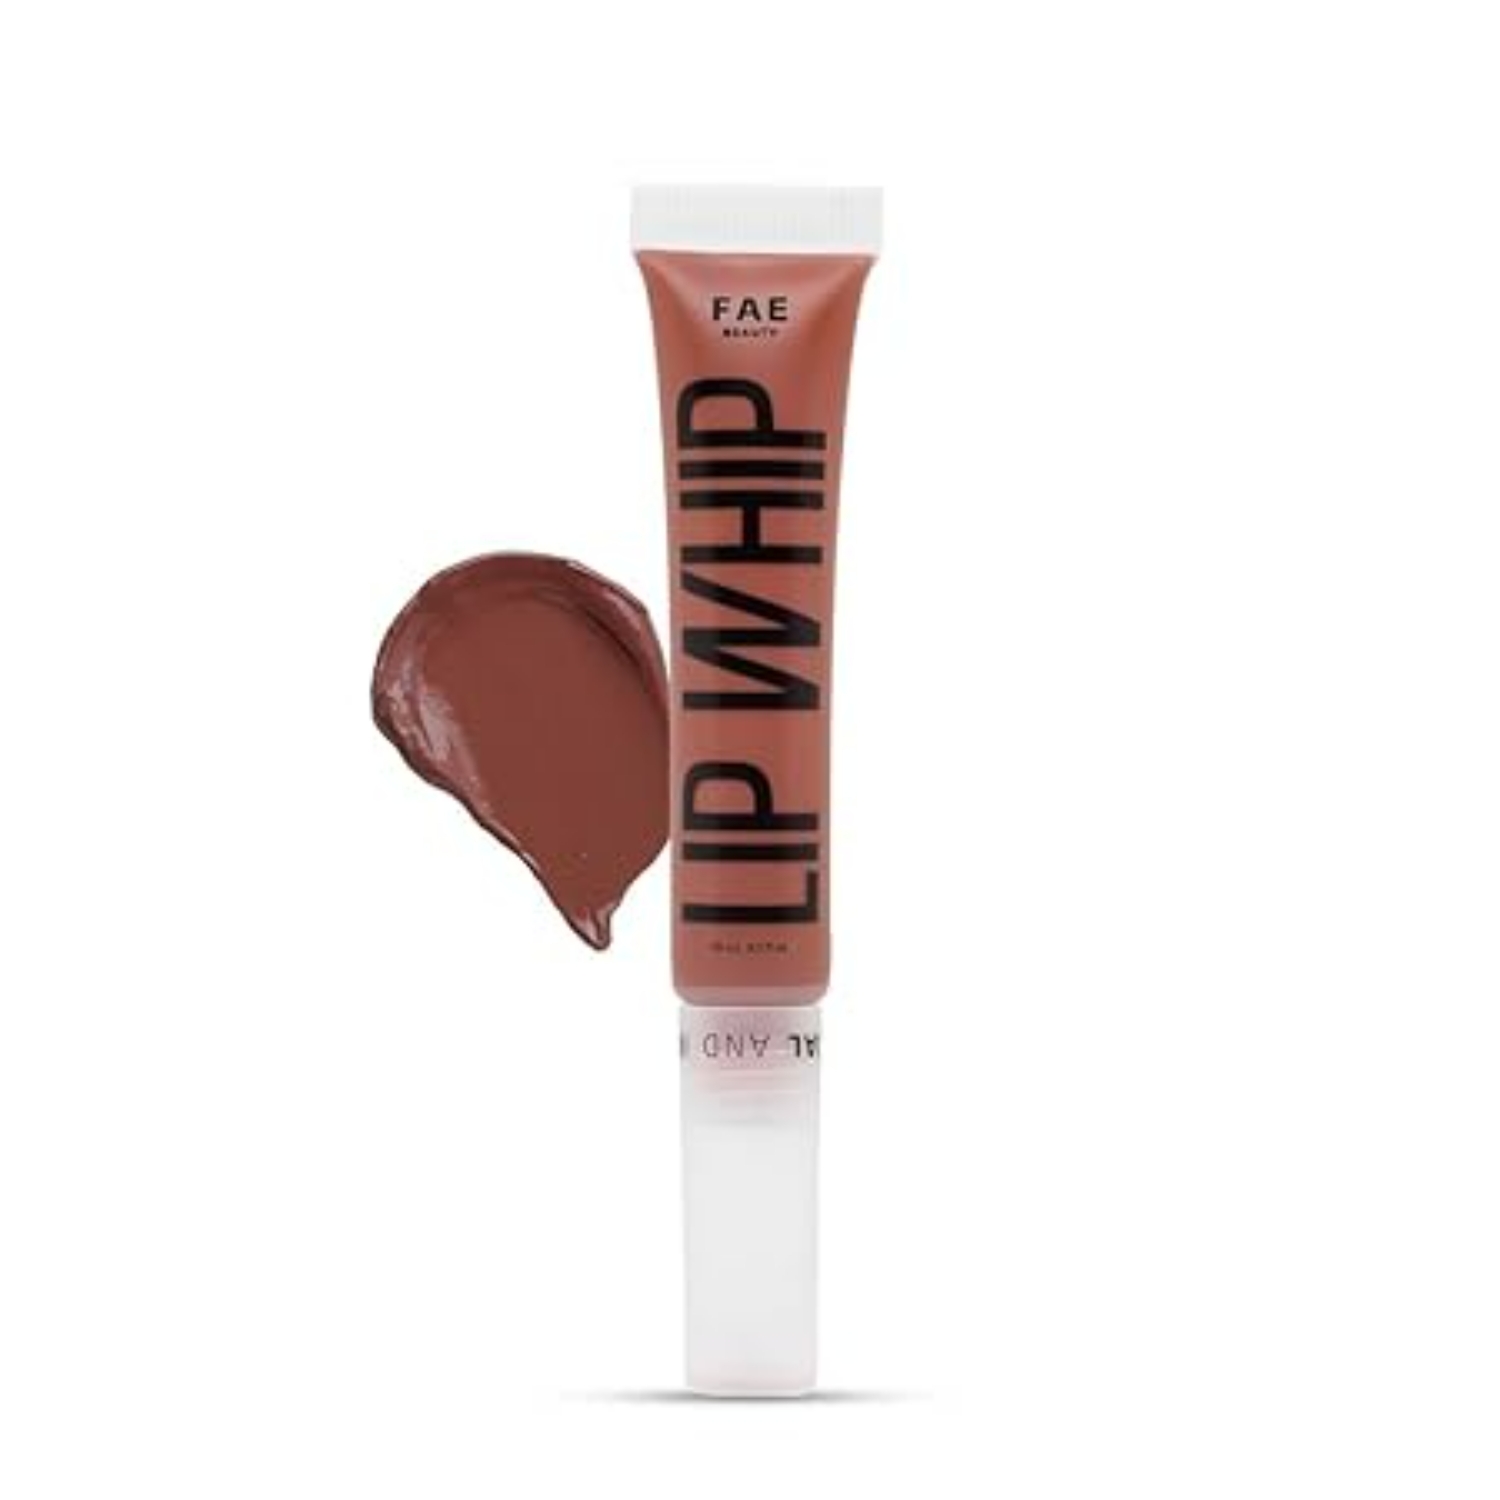 FAE BEAUTY | FAE BEAUTY Lip Whip 12H Matte Liquid Lipstick, Vegan, Enriched with Vitamin E and Cherry Coffee - Safeword (10g)